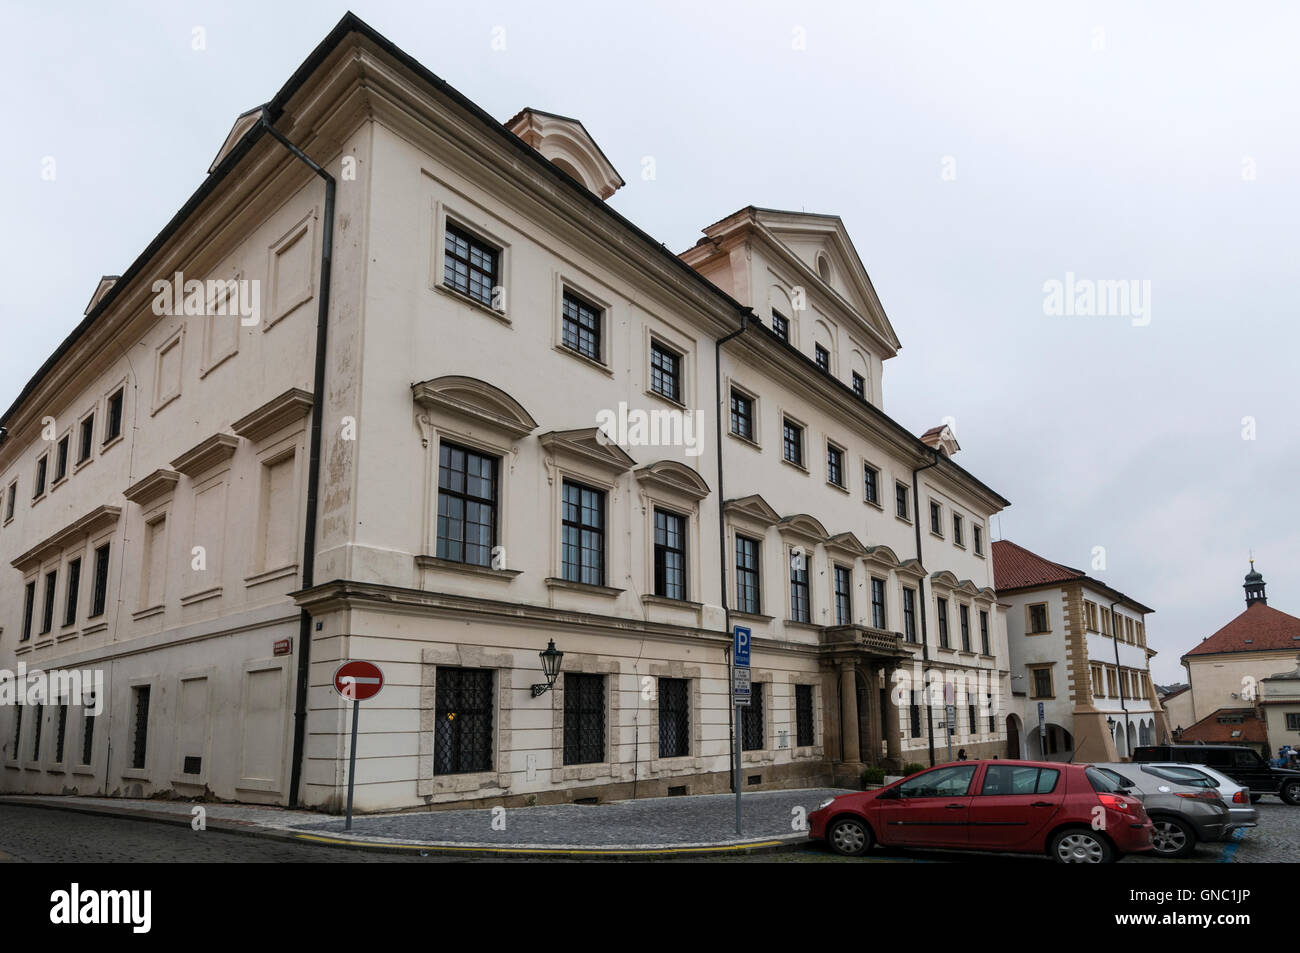 The Czech Army Barracks of the Castle Guard (presidential guards) in Prague in the Czech Republic Stock Photo